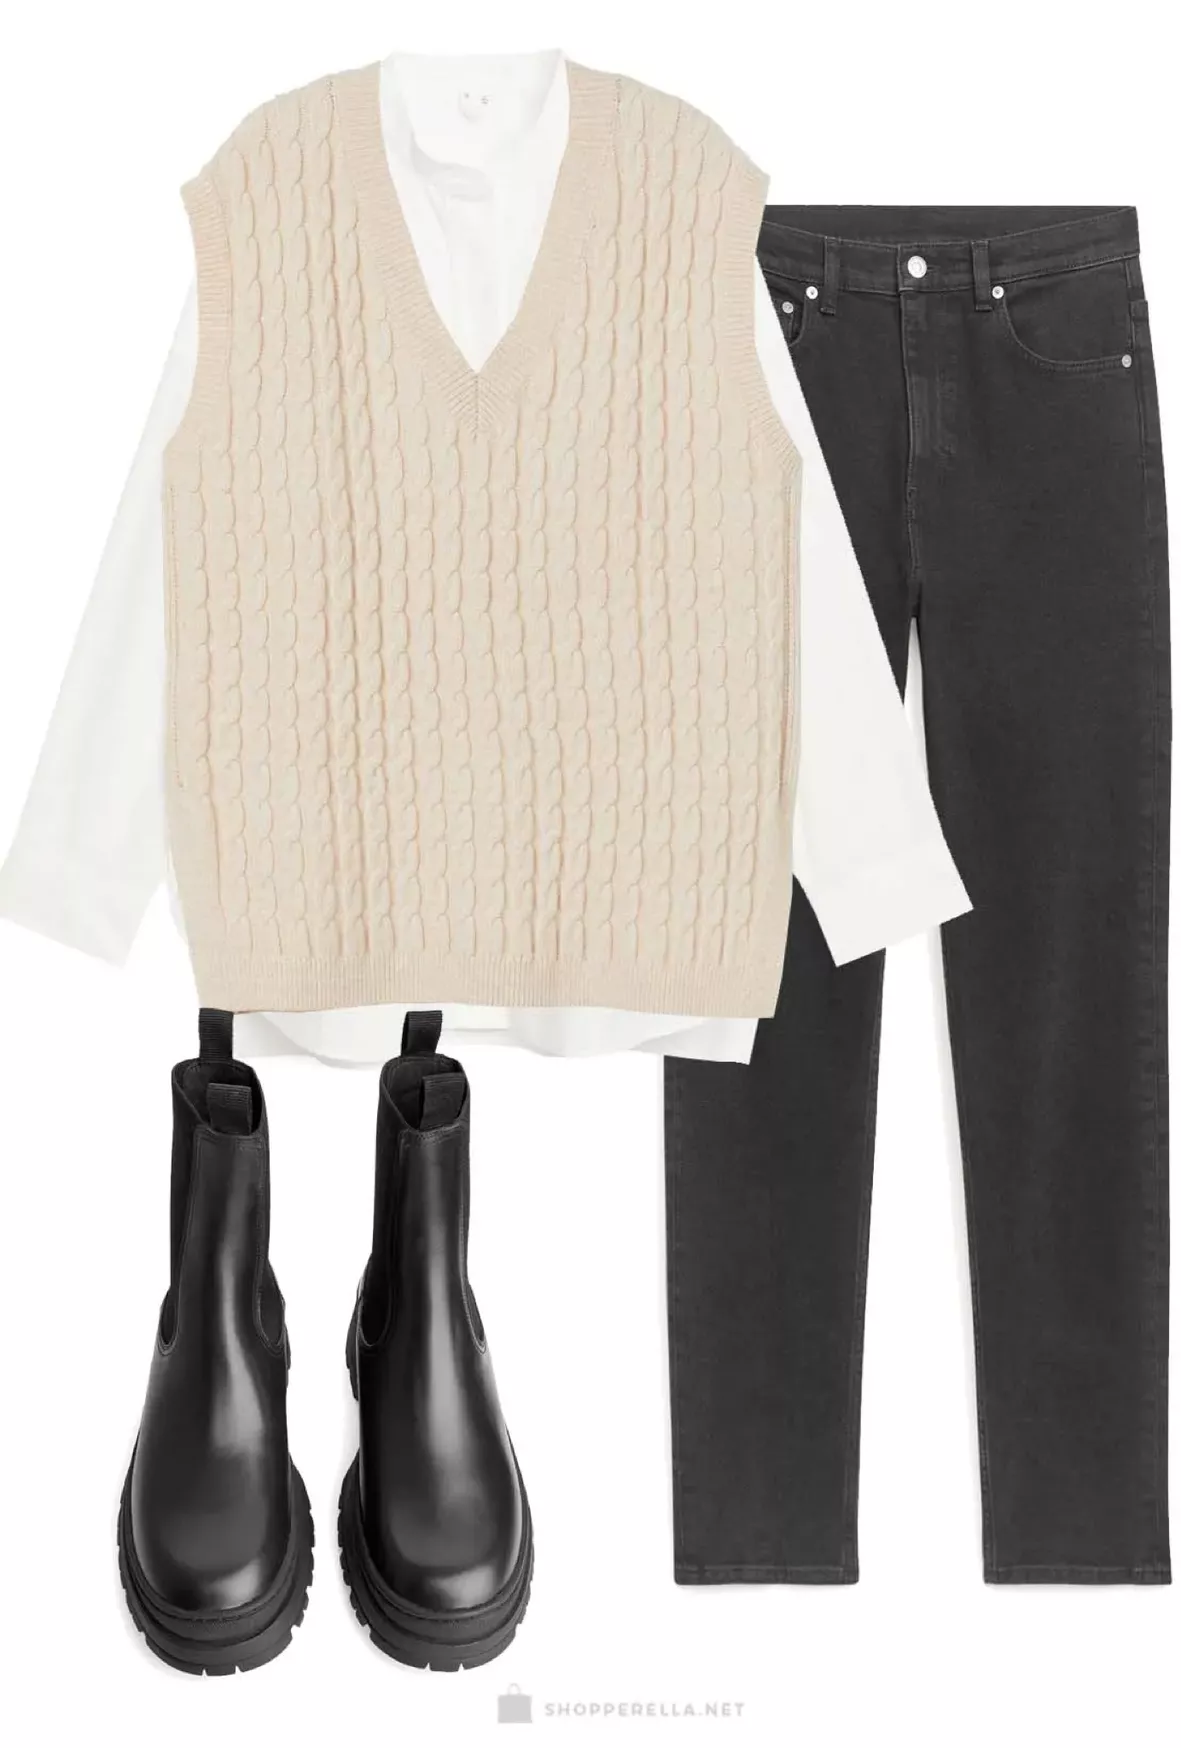 Knee high boots outfit - Shopperella